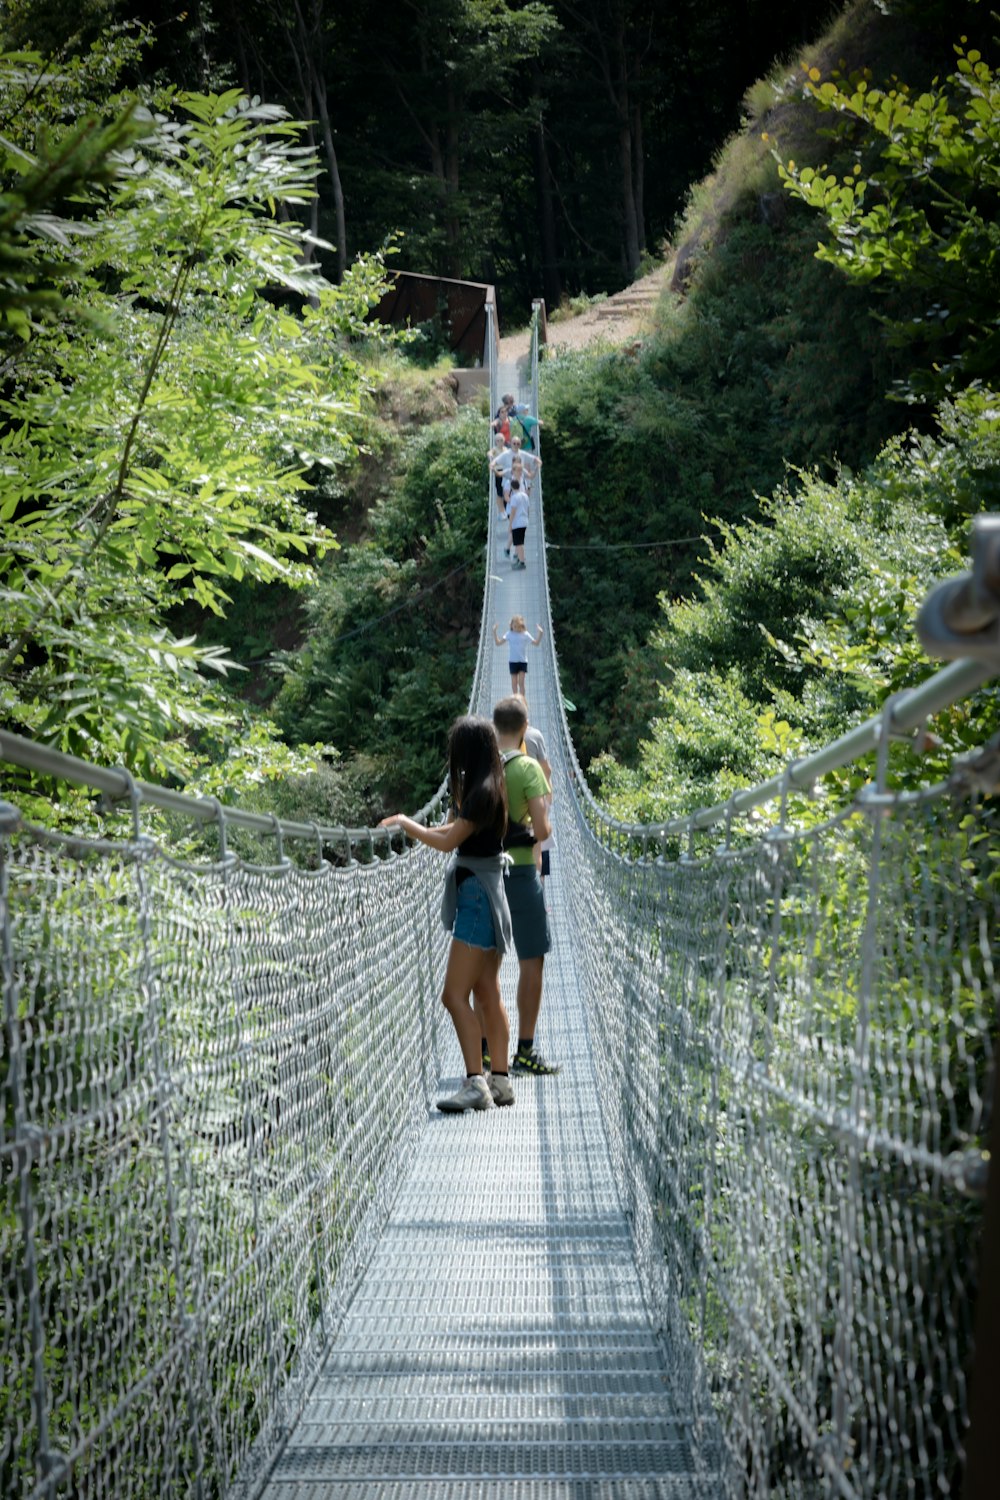 a man and woman on a suspension bridge